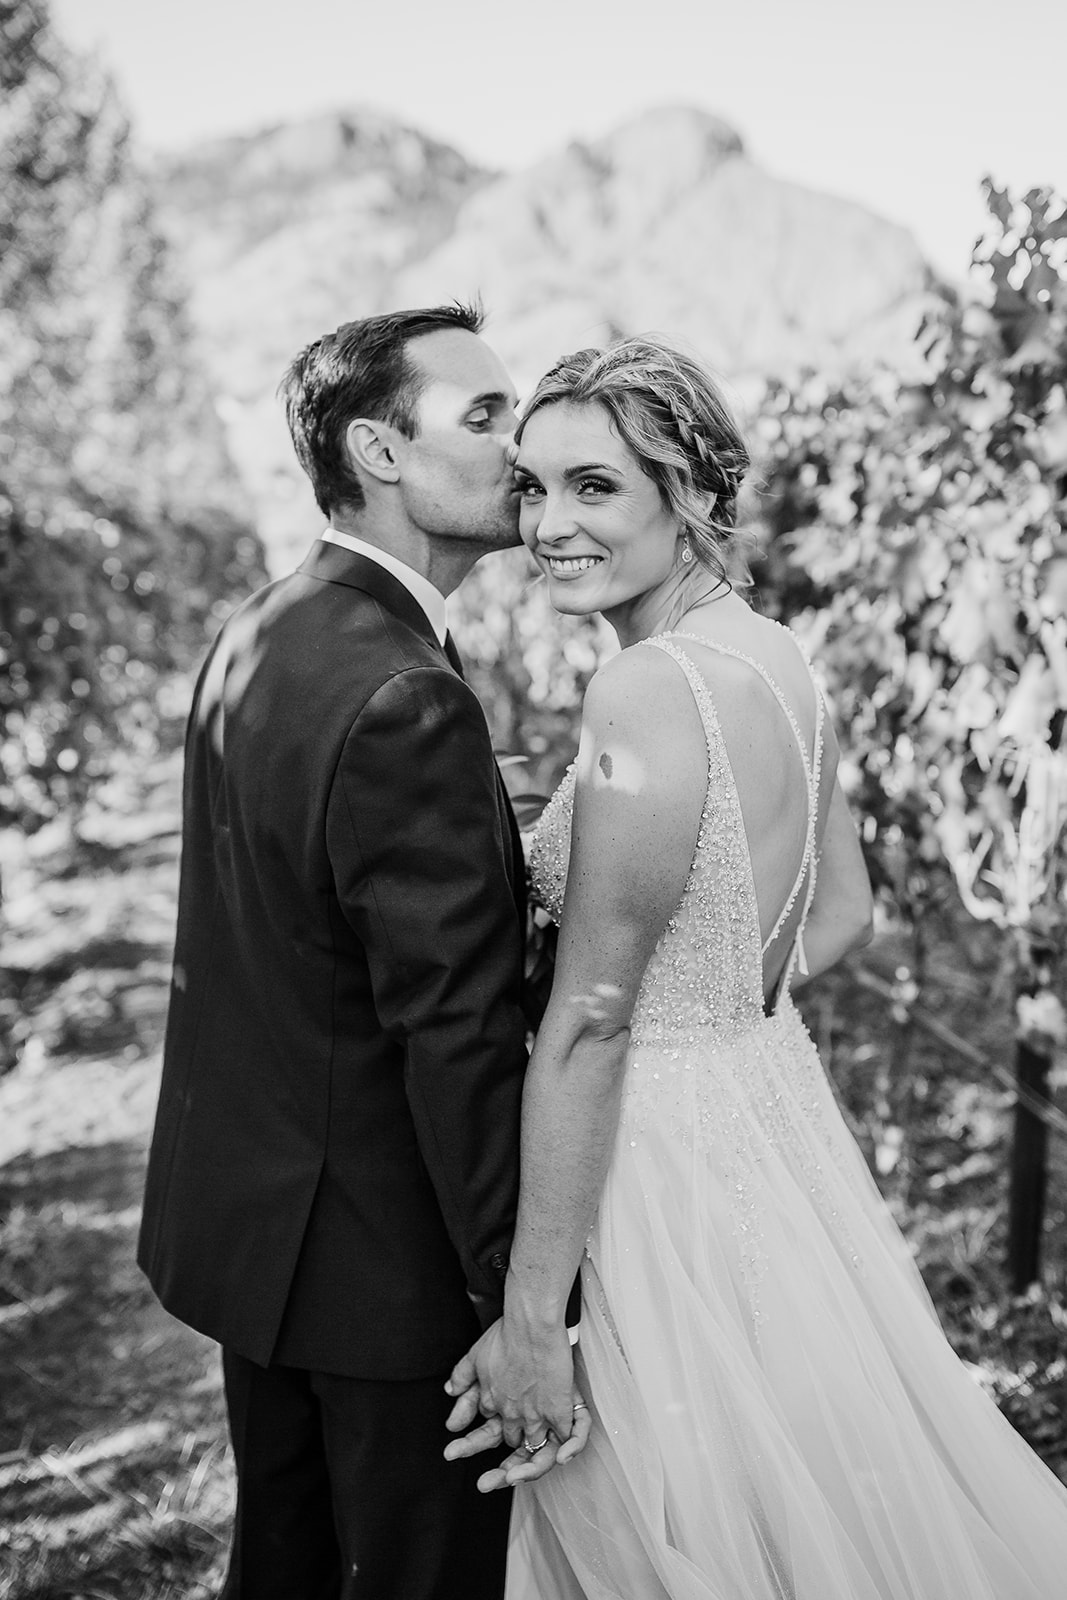 Black and white photo of a groom kissing his bride's cheek as they pose for their wedding photographer outside